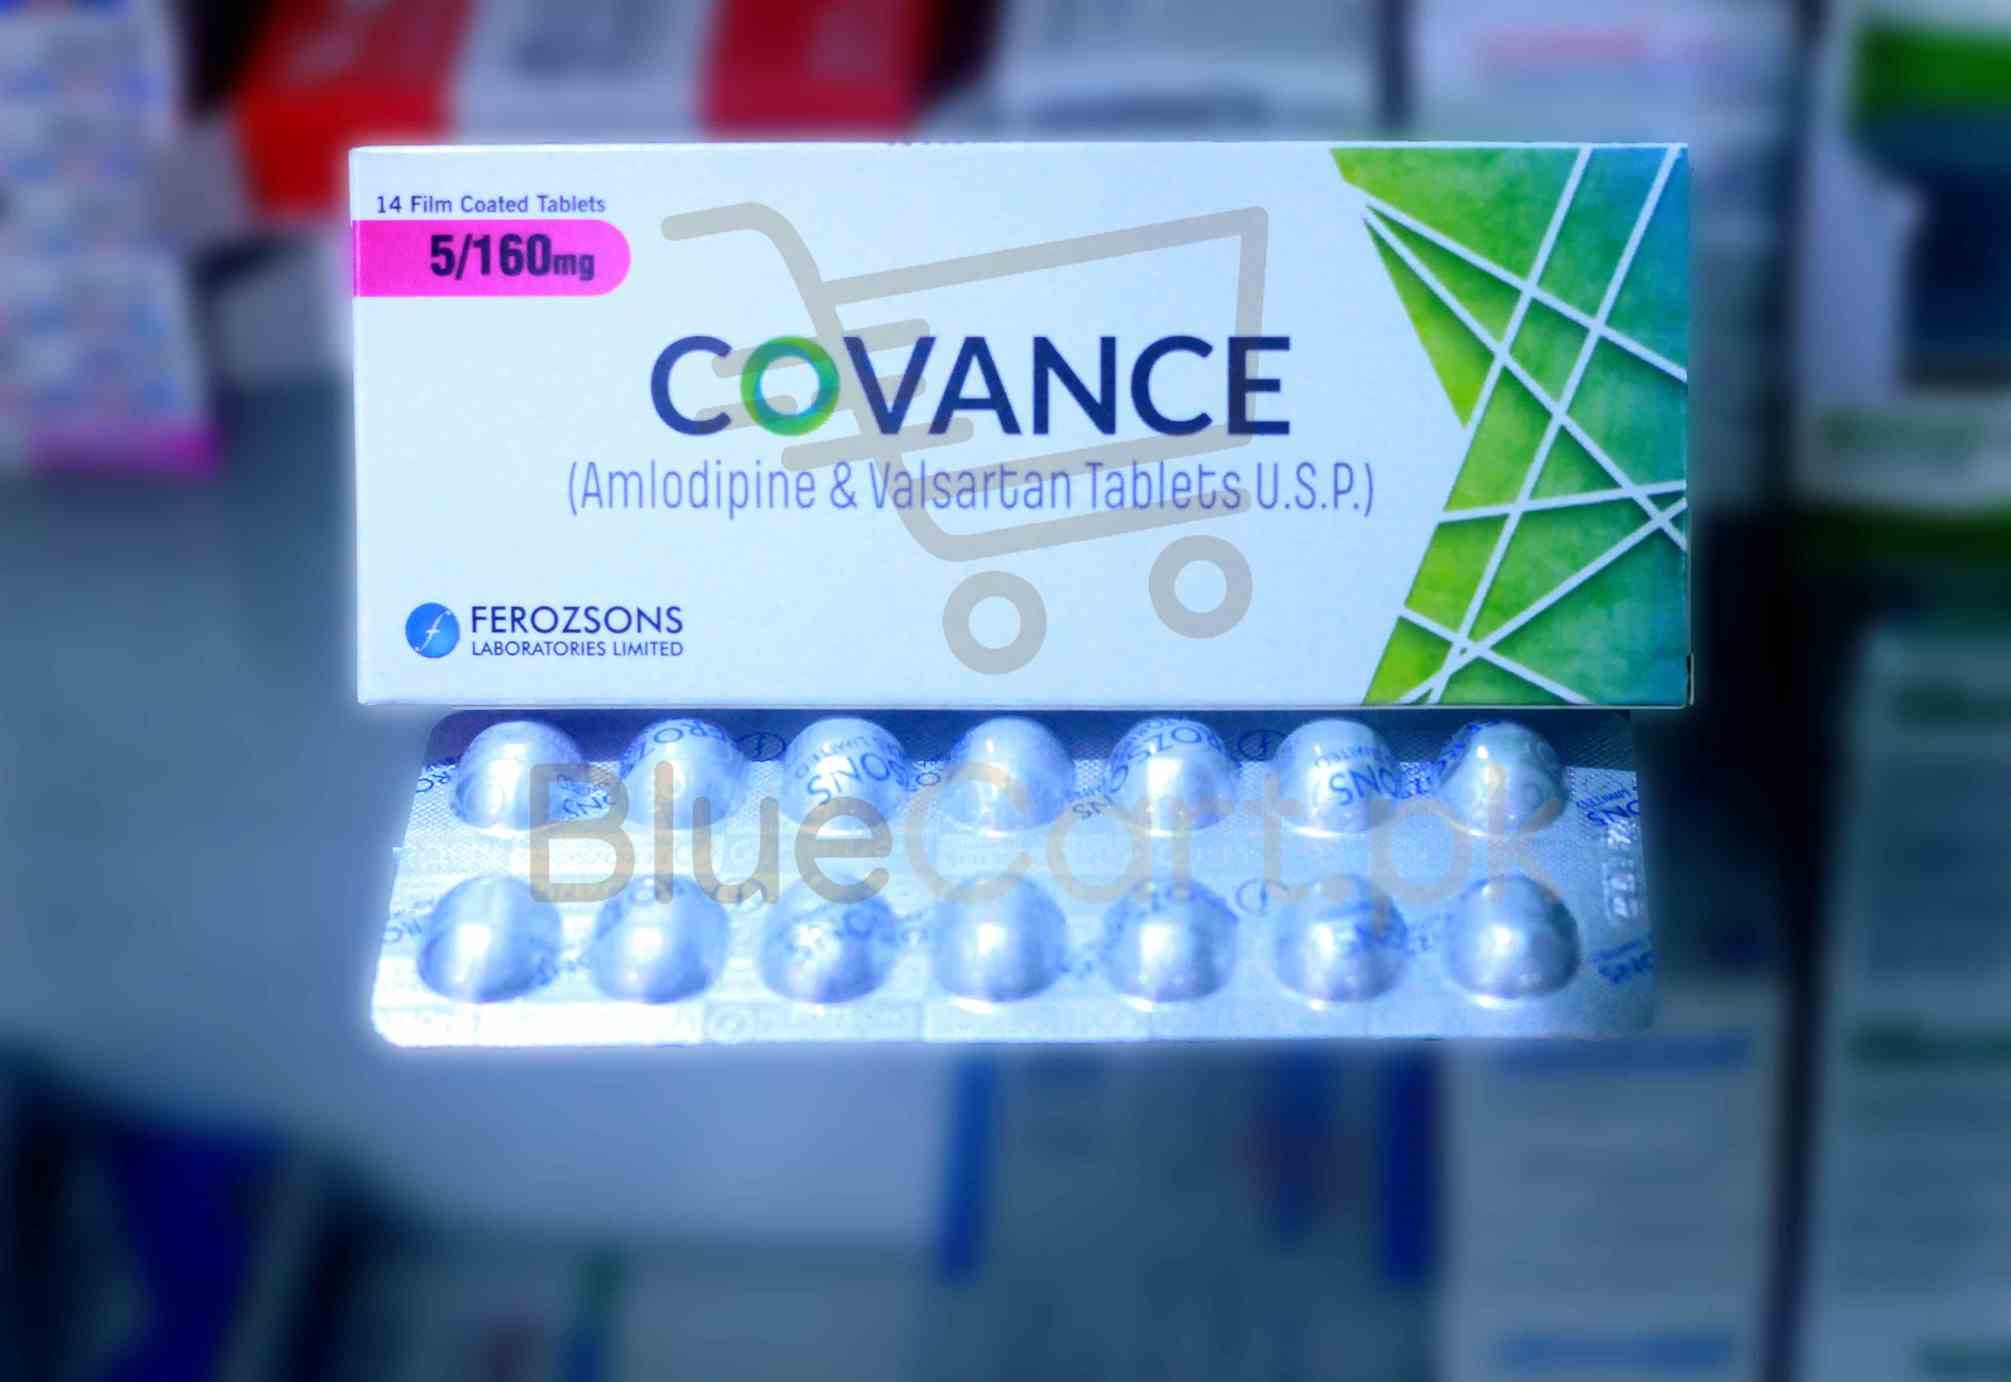 Covance Tablet 5-160mg